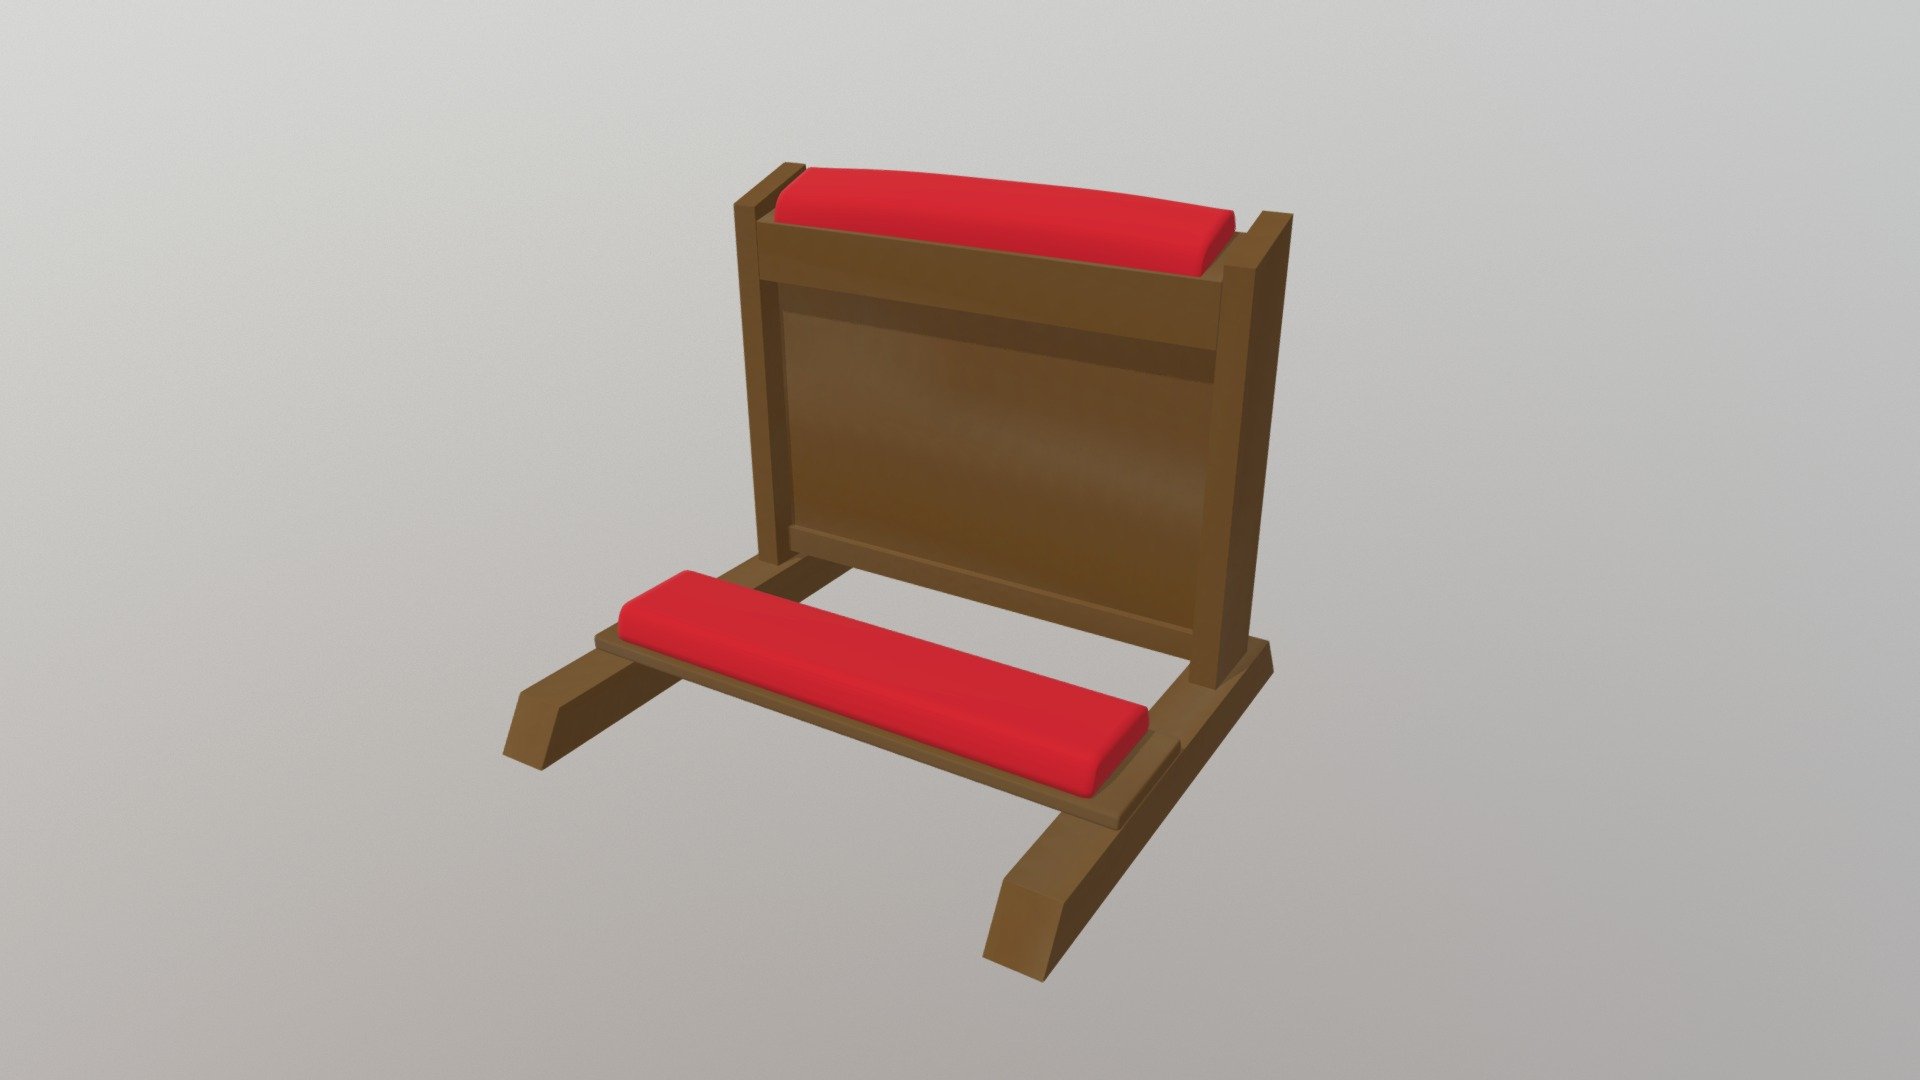 This is a prayer bench for the church asset pack. It was made using Blender 3d model